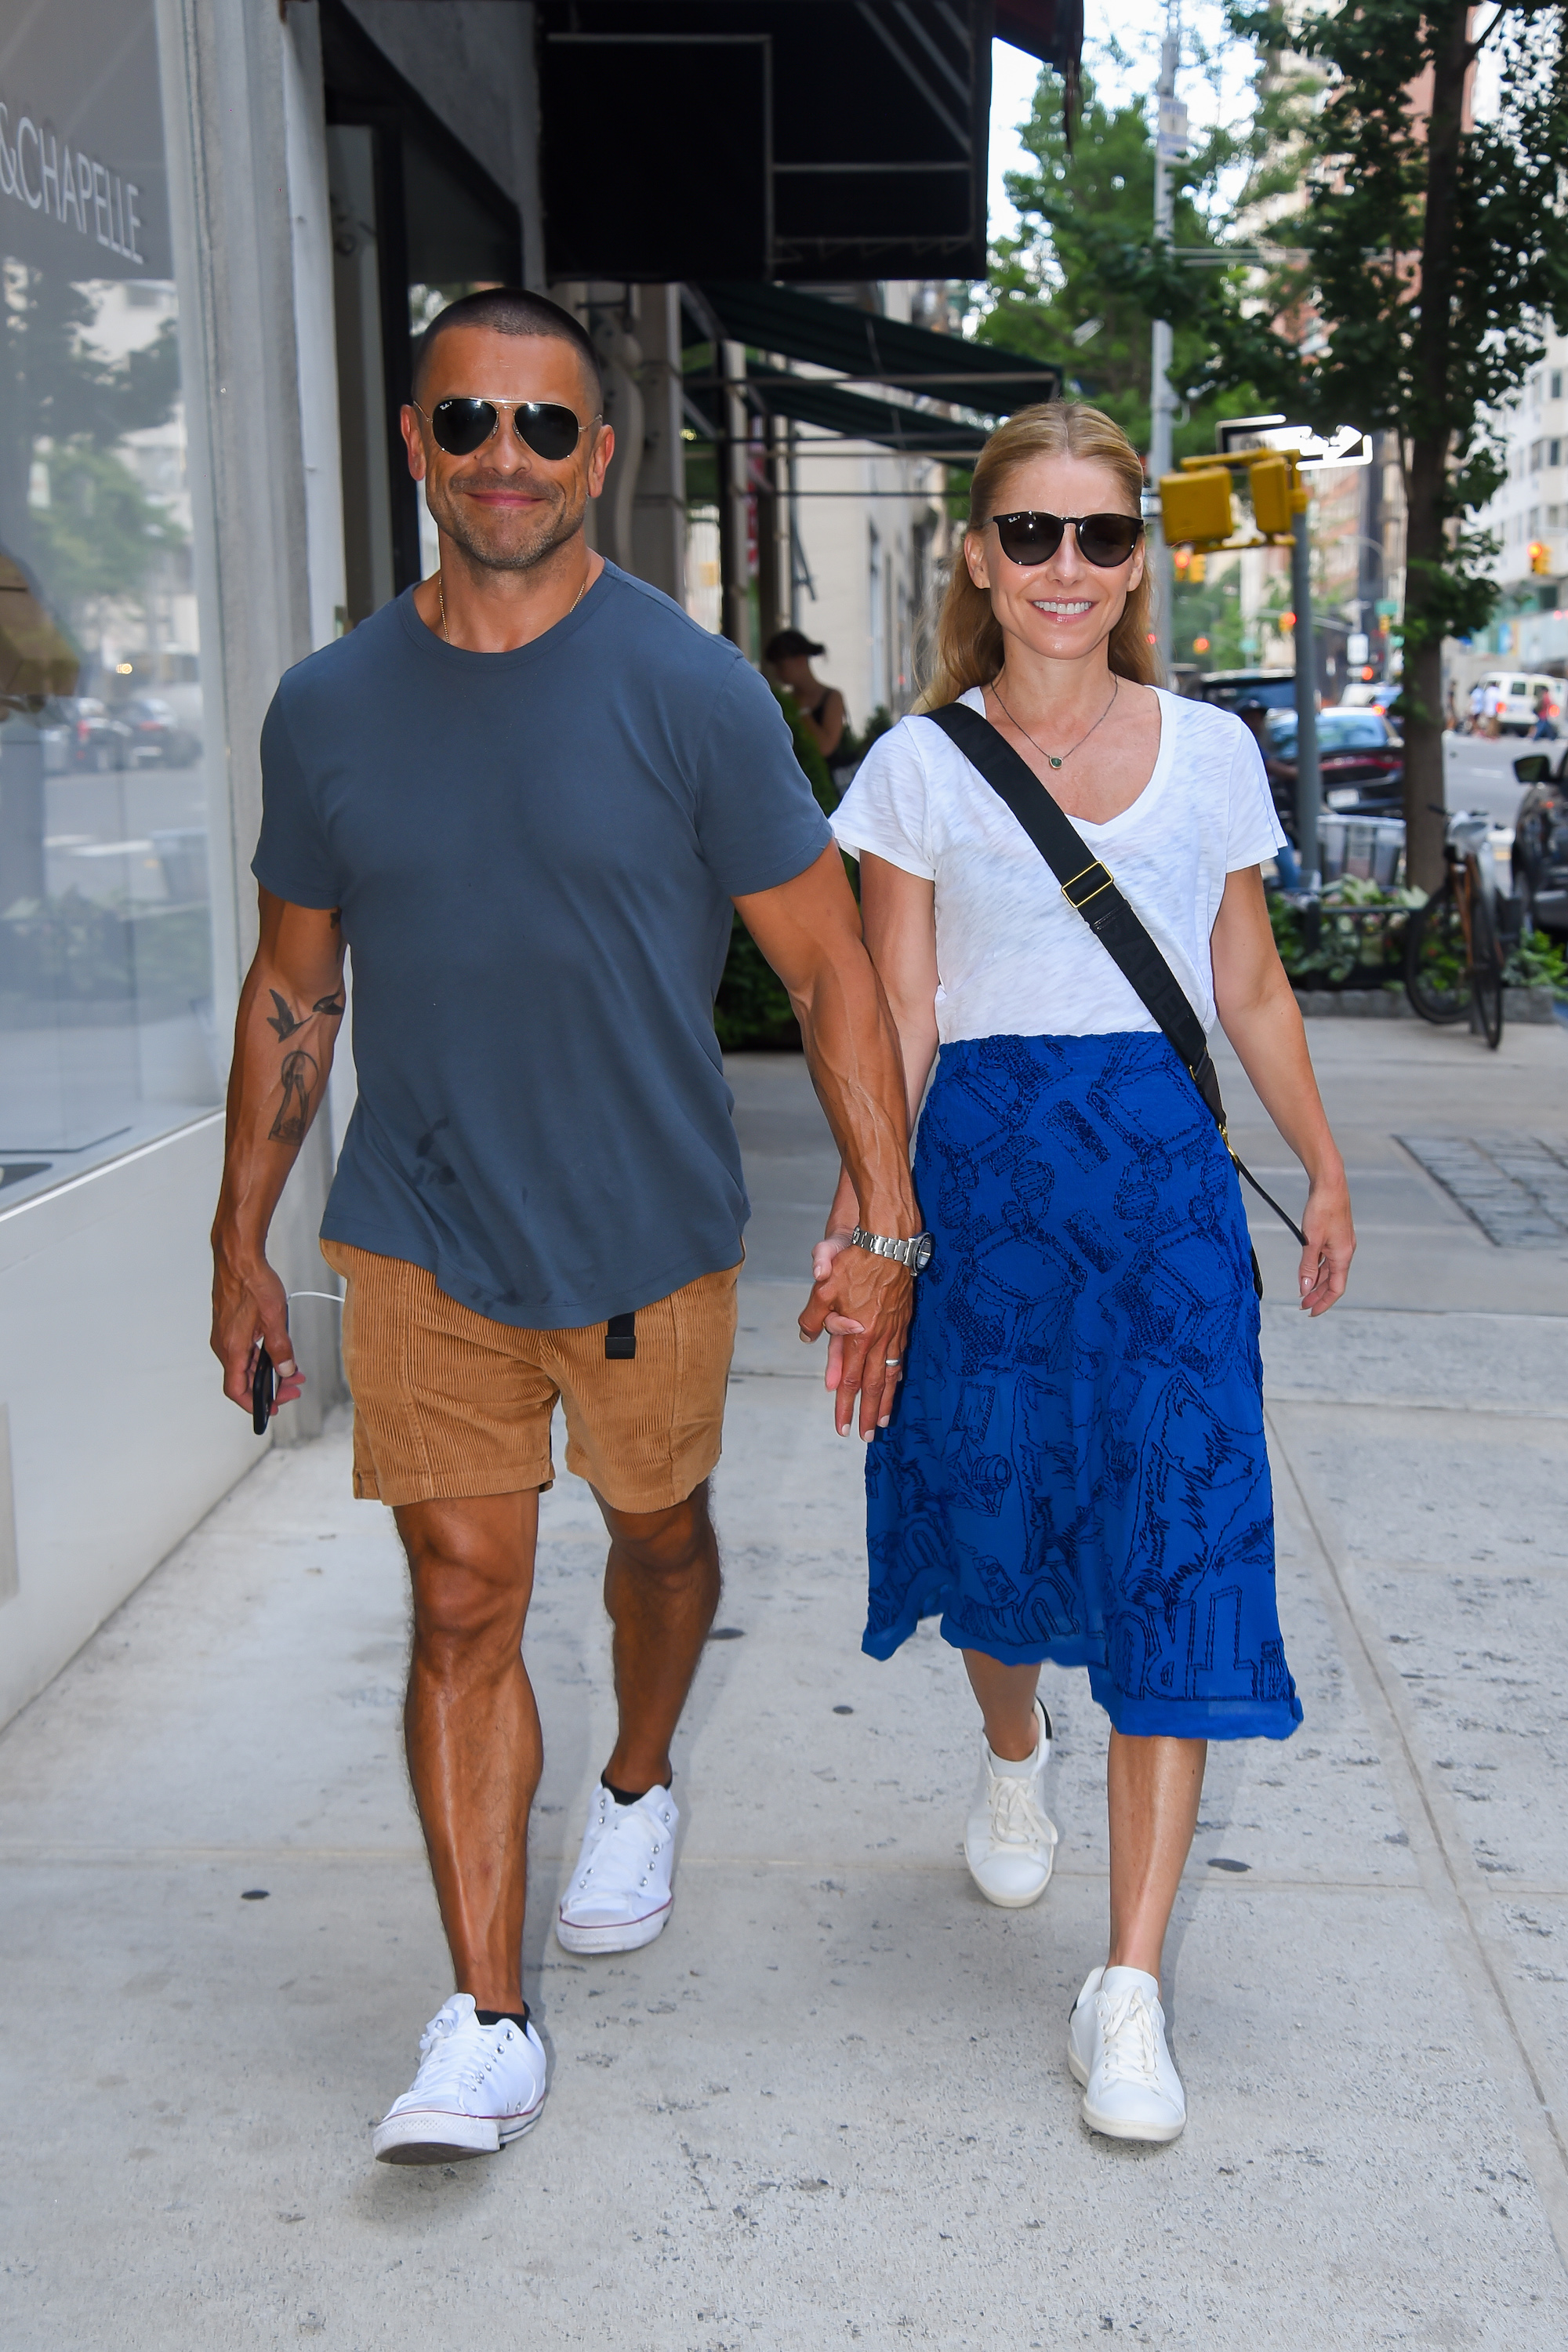 Mark Consuelos and Kelly Ripa in Manhattan on July 21, 2022. | Source: Getty Images